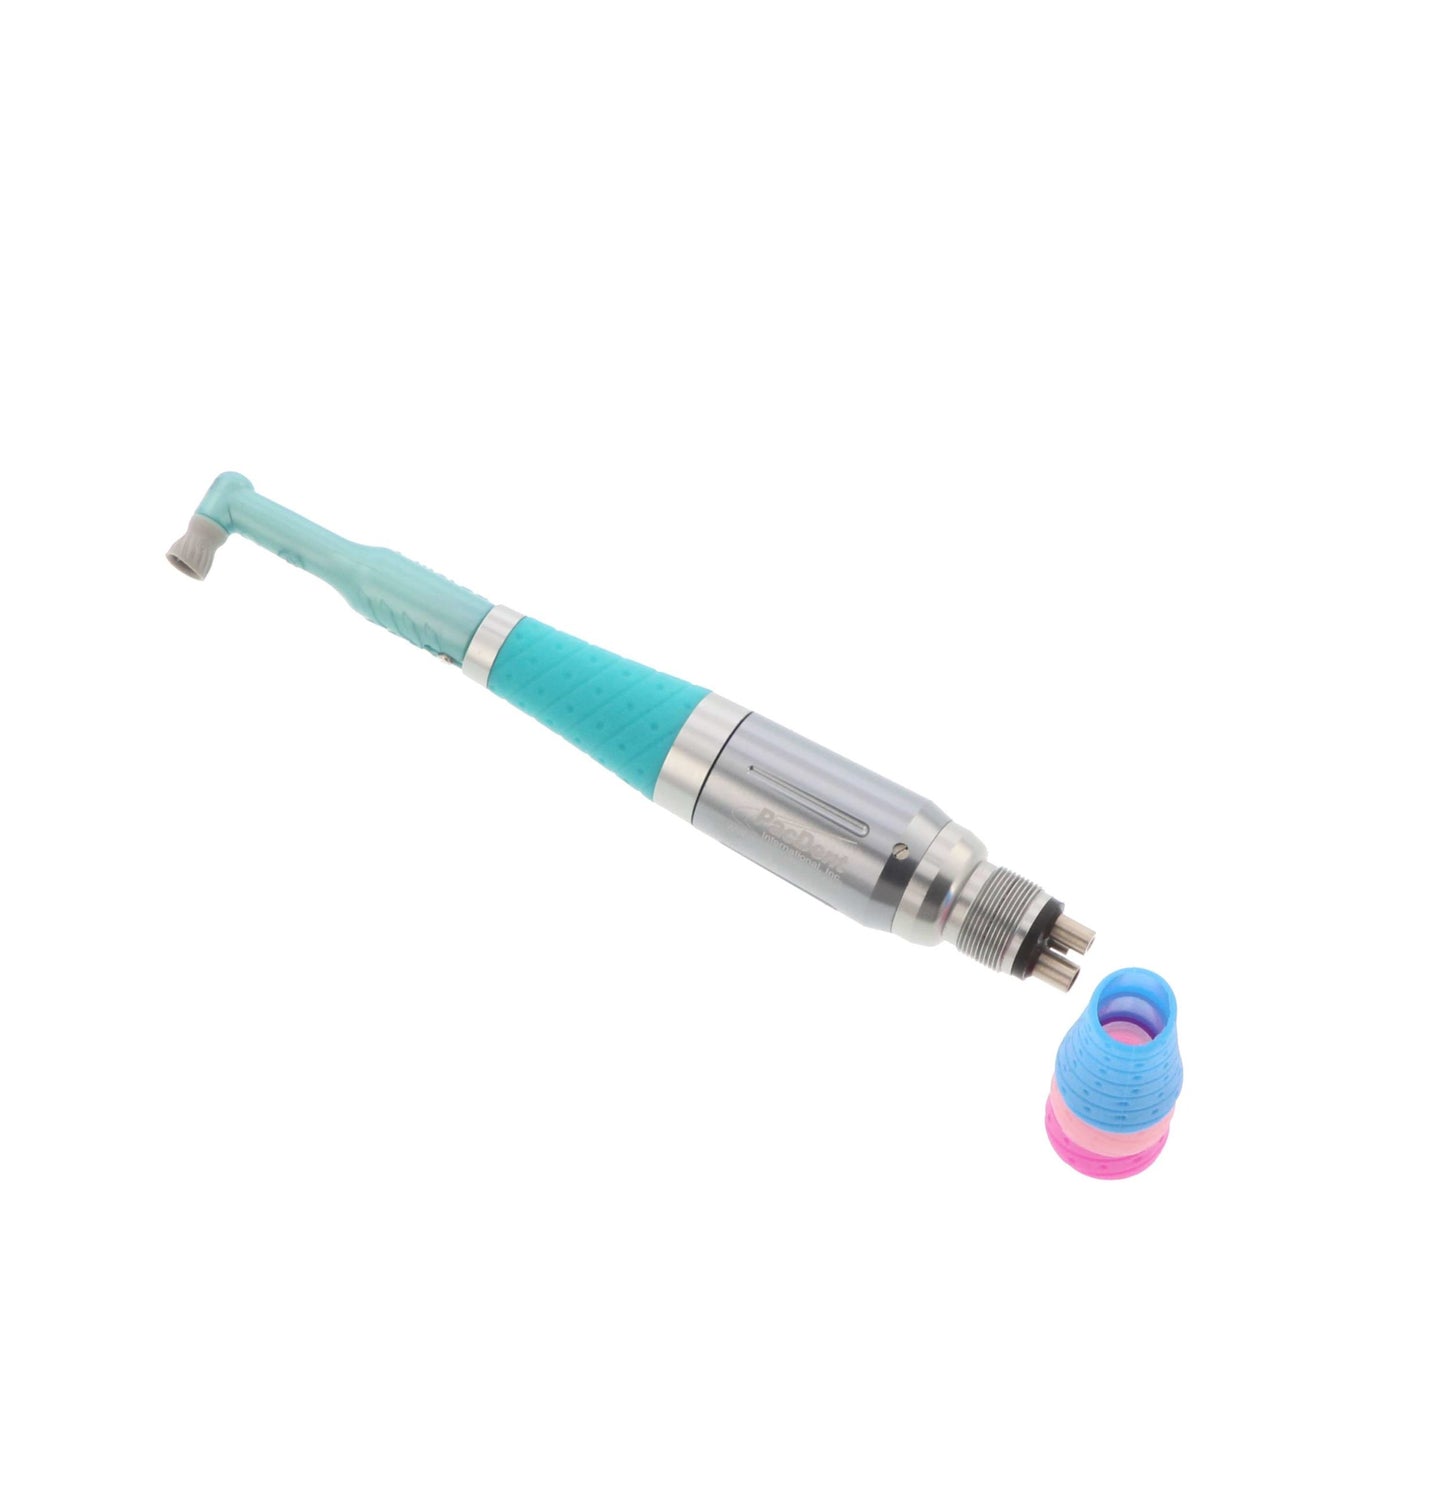 ProMate and accessories - 1 x Hygiene Handpiece with 3 X silicon grips